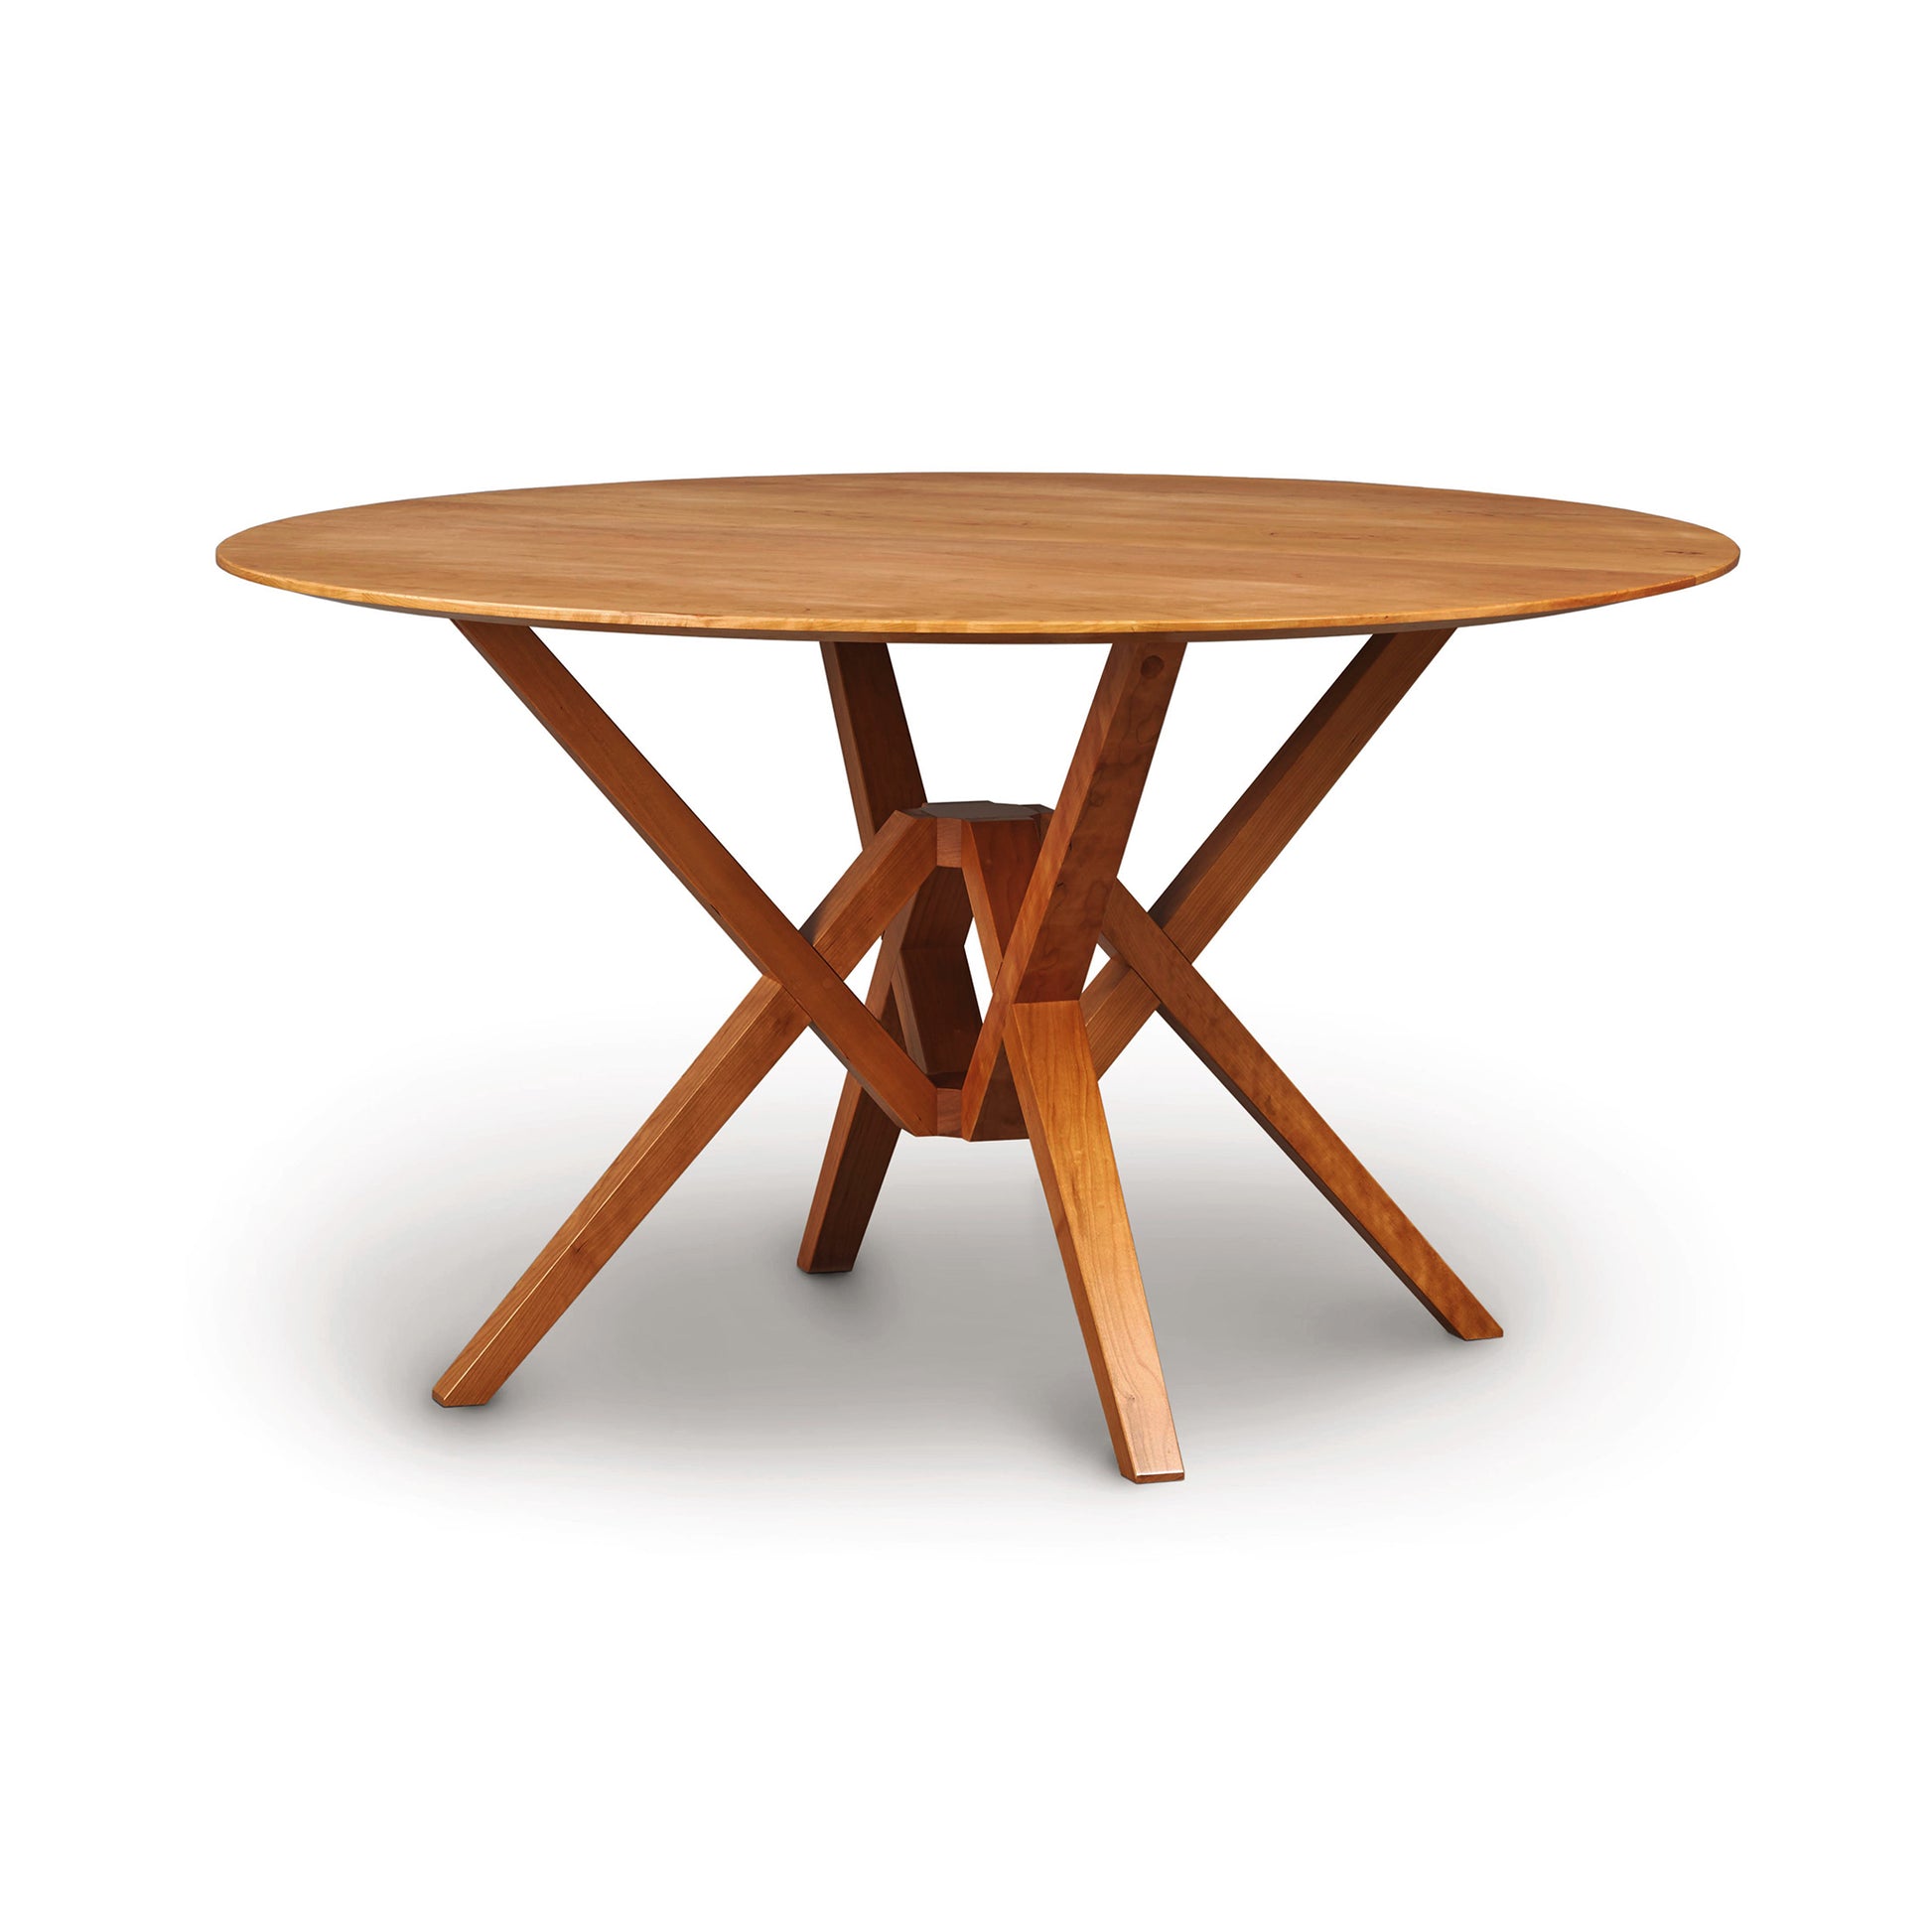 A wooden Copeland Furniture Exeter Round Solid Top Dining Table with a cross-legged base, isolated on a white background.